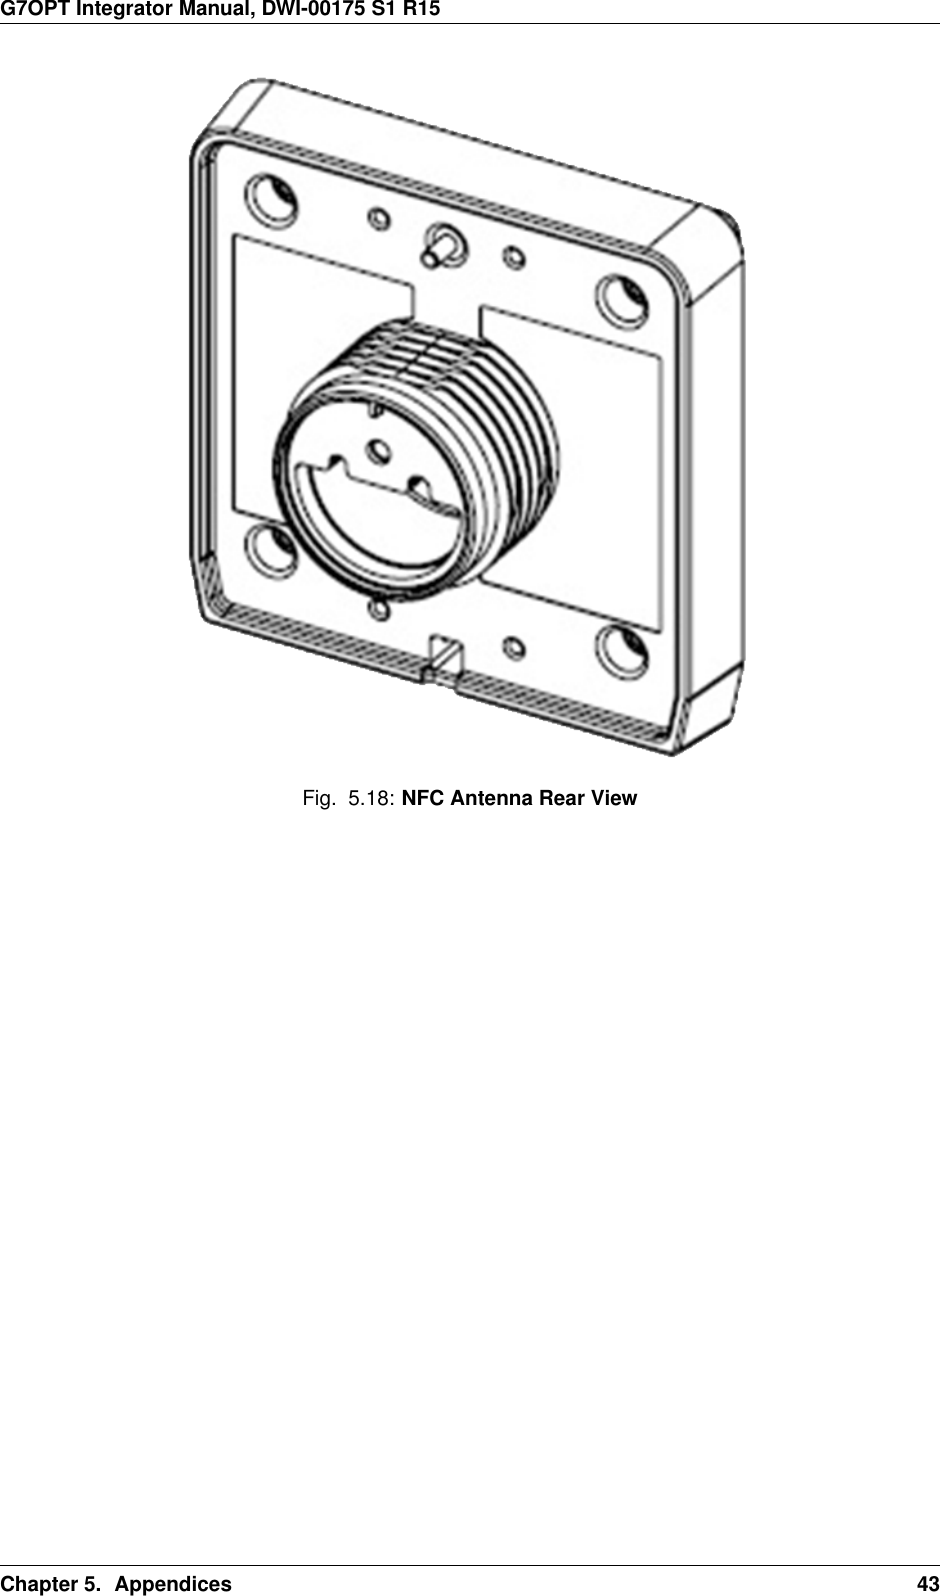 G7OPT Integrator Manual, DWI-00175 S1 R15Fig. 5.18: NFC Antenna Rear ViewChapter 5. Appendices 43